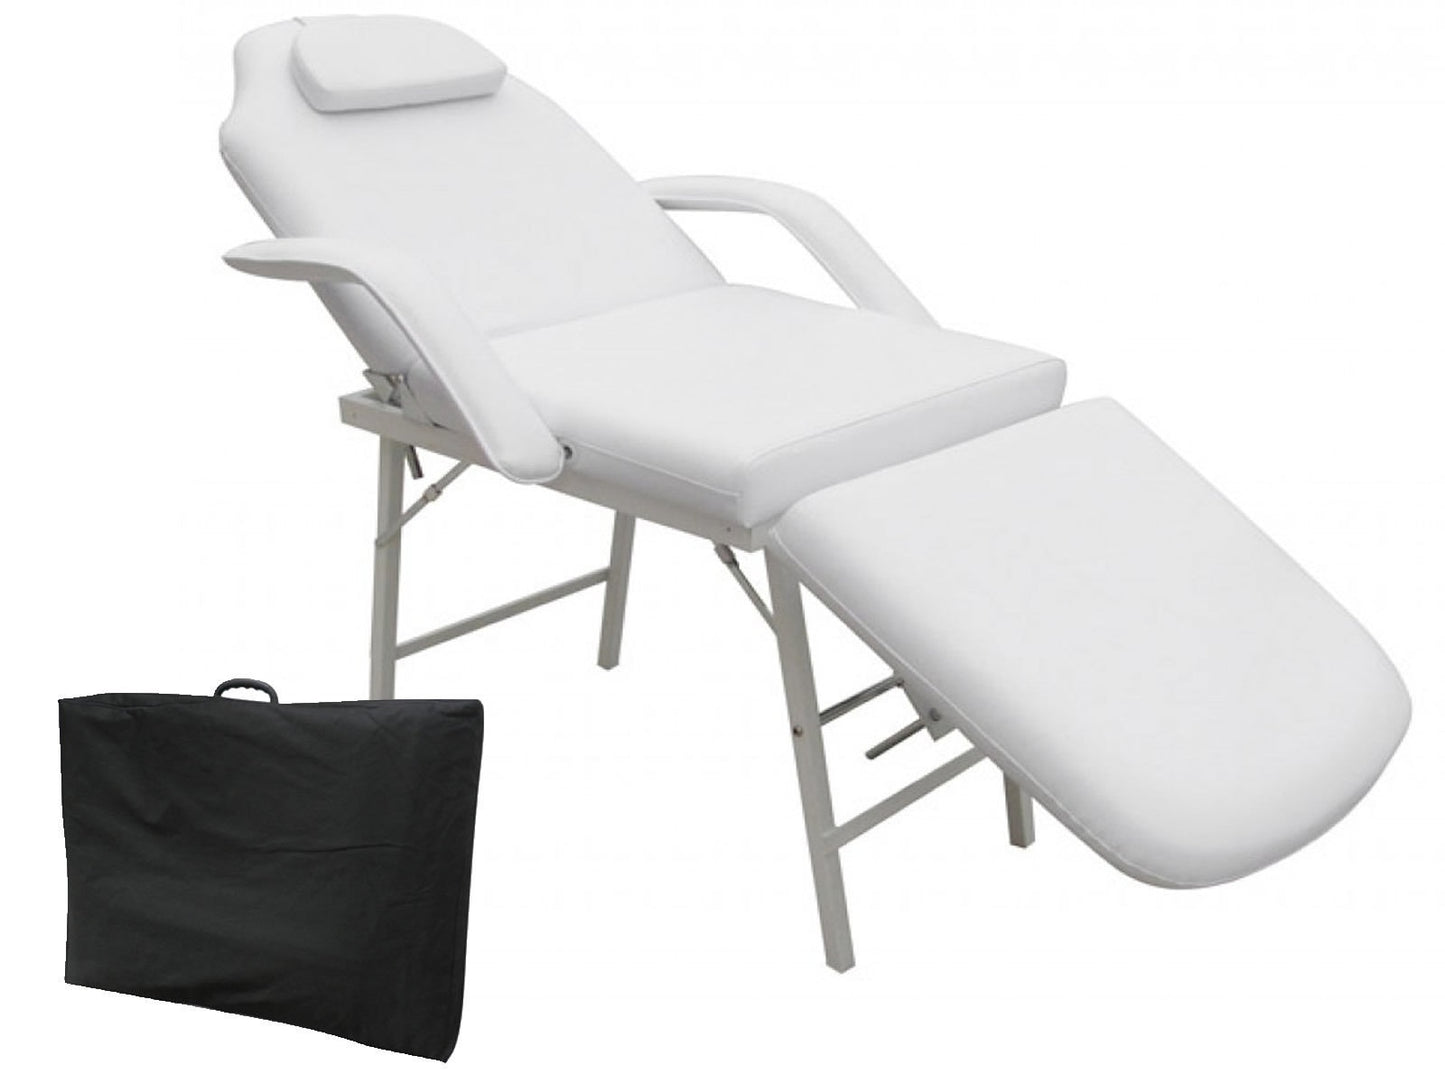 Costway - 73" Portable Facial Spa Bed Massage Table - Facial Spa Bed Table - Tattoo Parlor Bed - Beauty Salon Bed